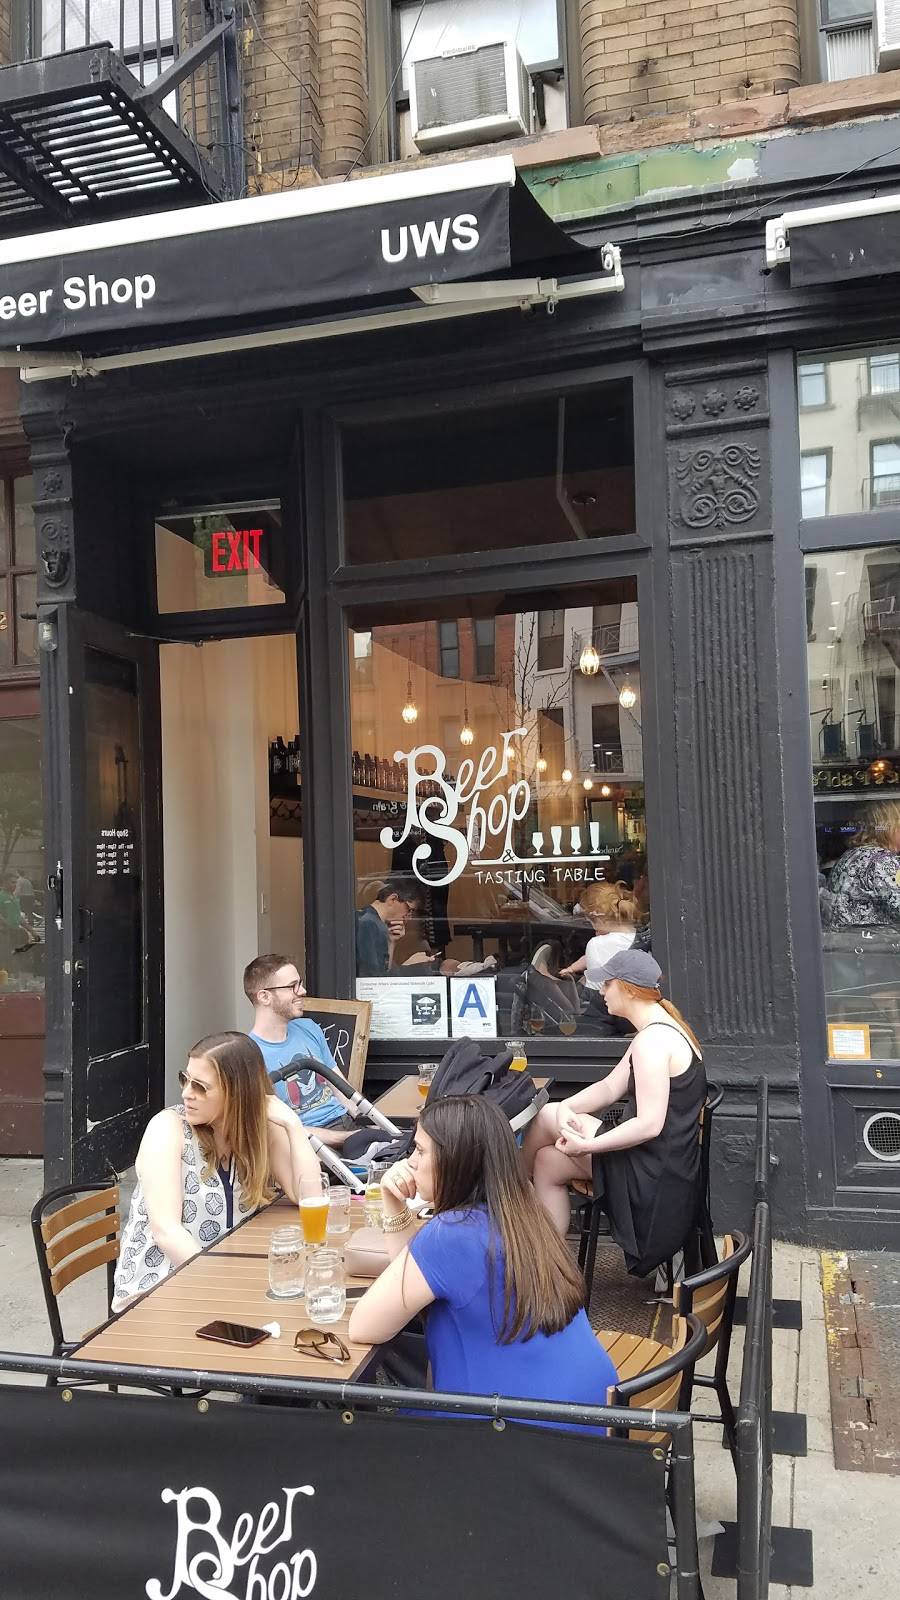 Beer Shop NYC | restaurant | 422 Amsterdam Ave, New York, NY 10024, USA | 2123622337 OR +1 212-362-2337